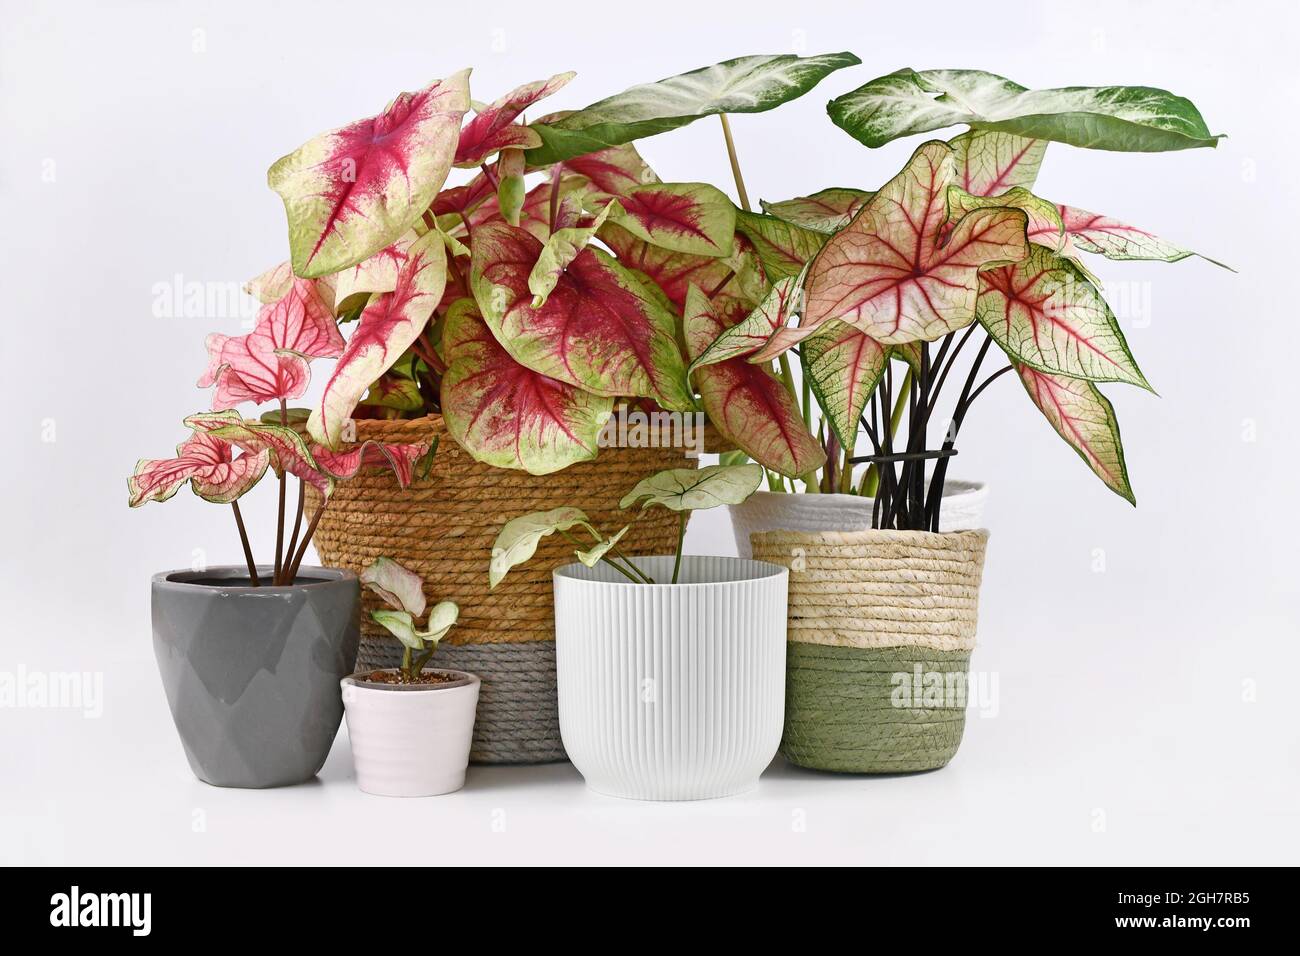 Different colorful exotic Caladium plants in flower pots Stock Photo